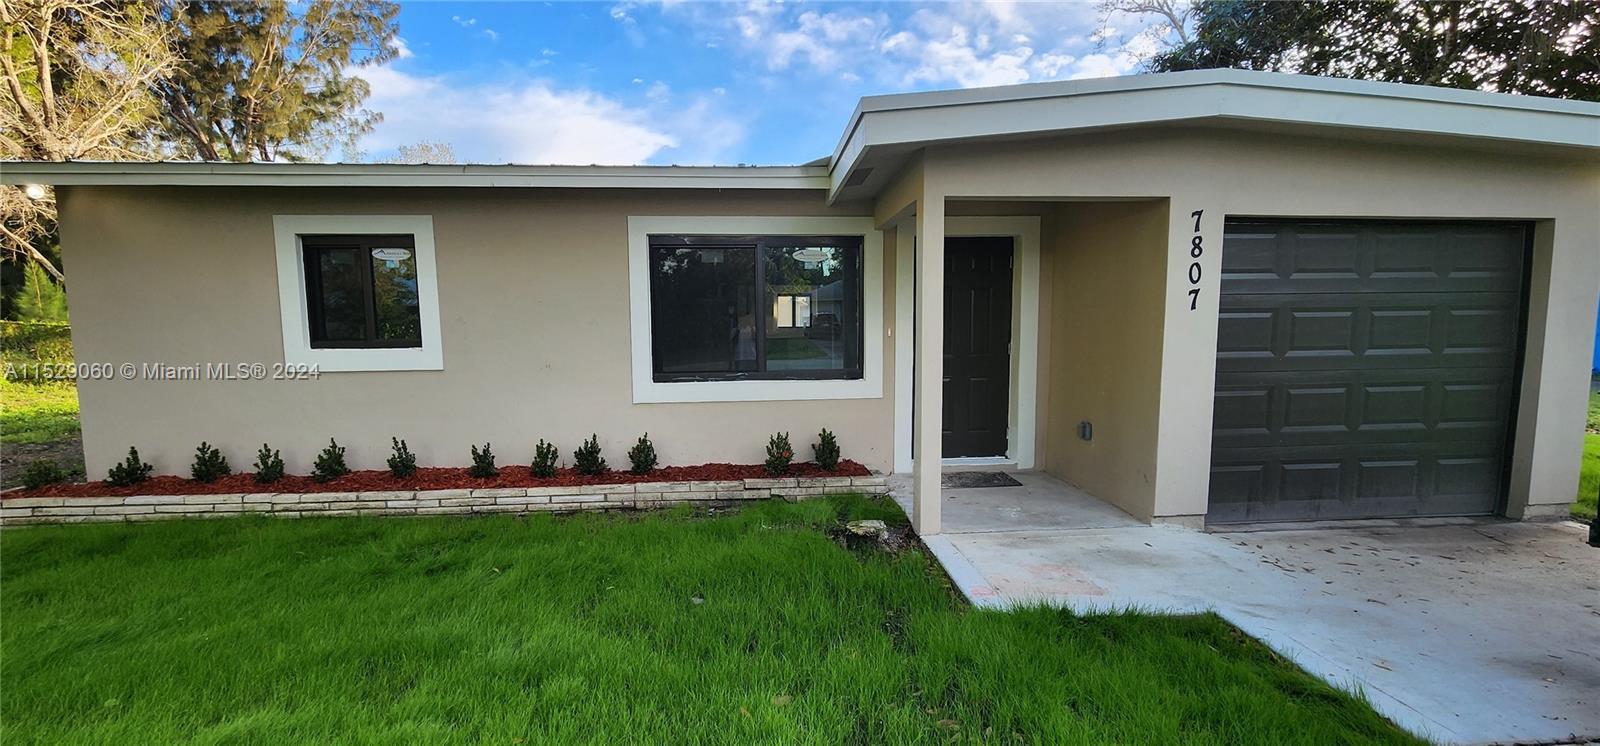 Photo of 7807 Holopaw Ave in Fort Pierce, FL